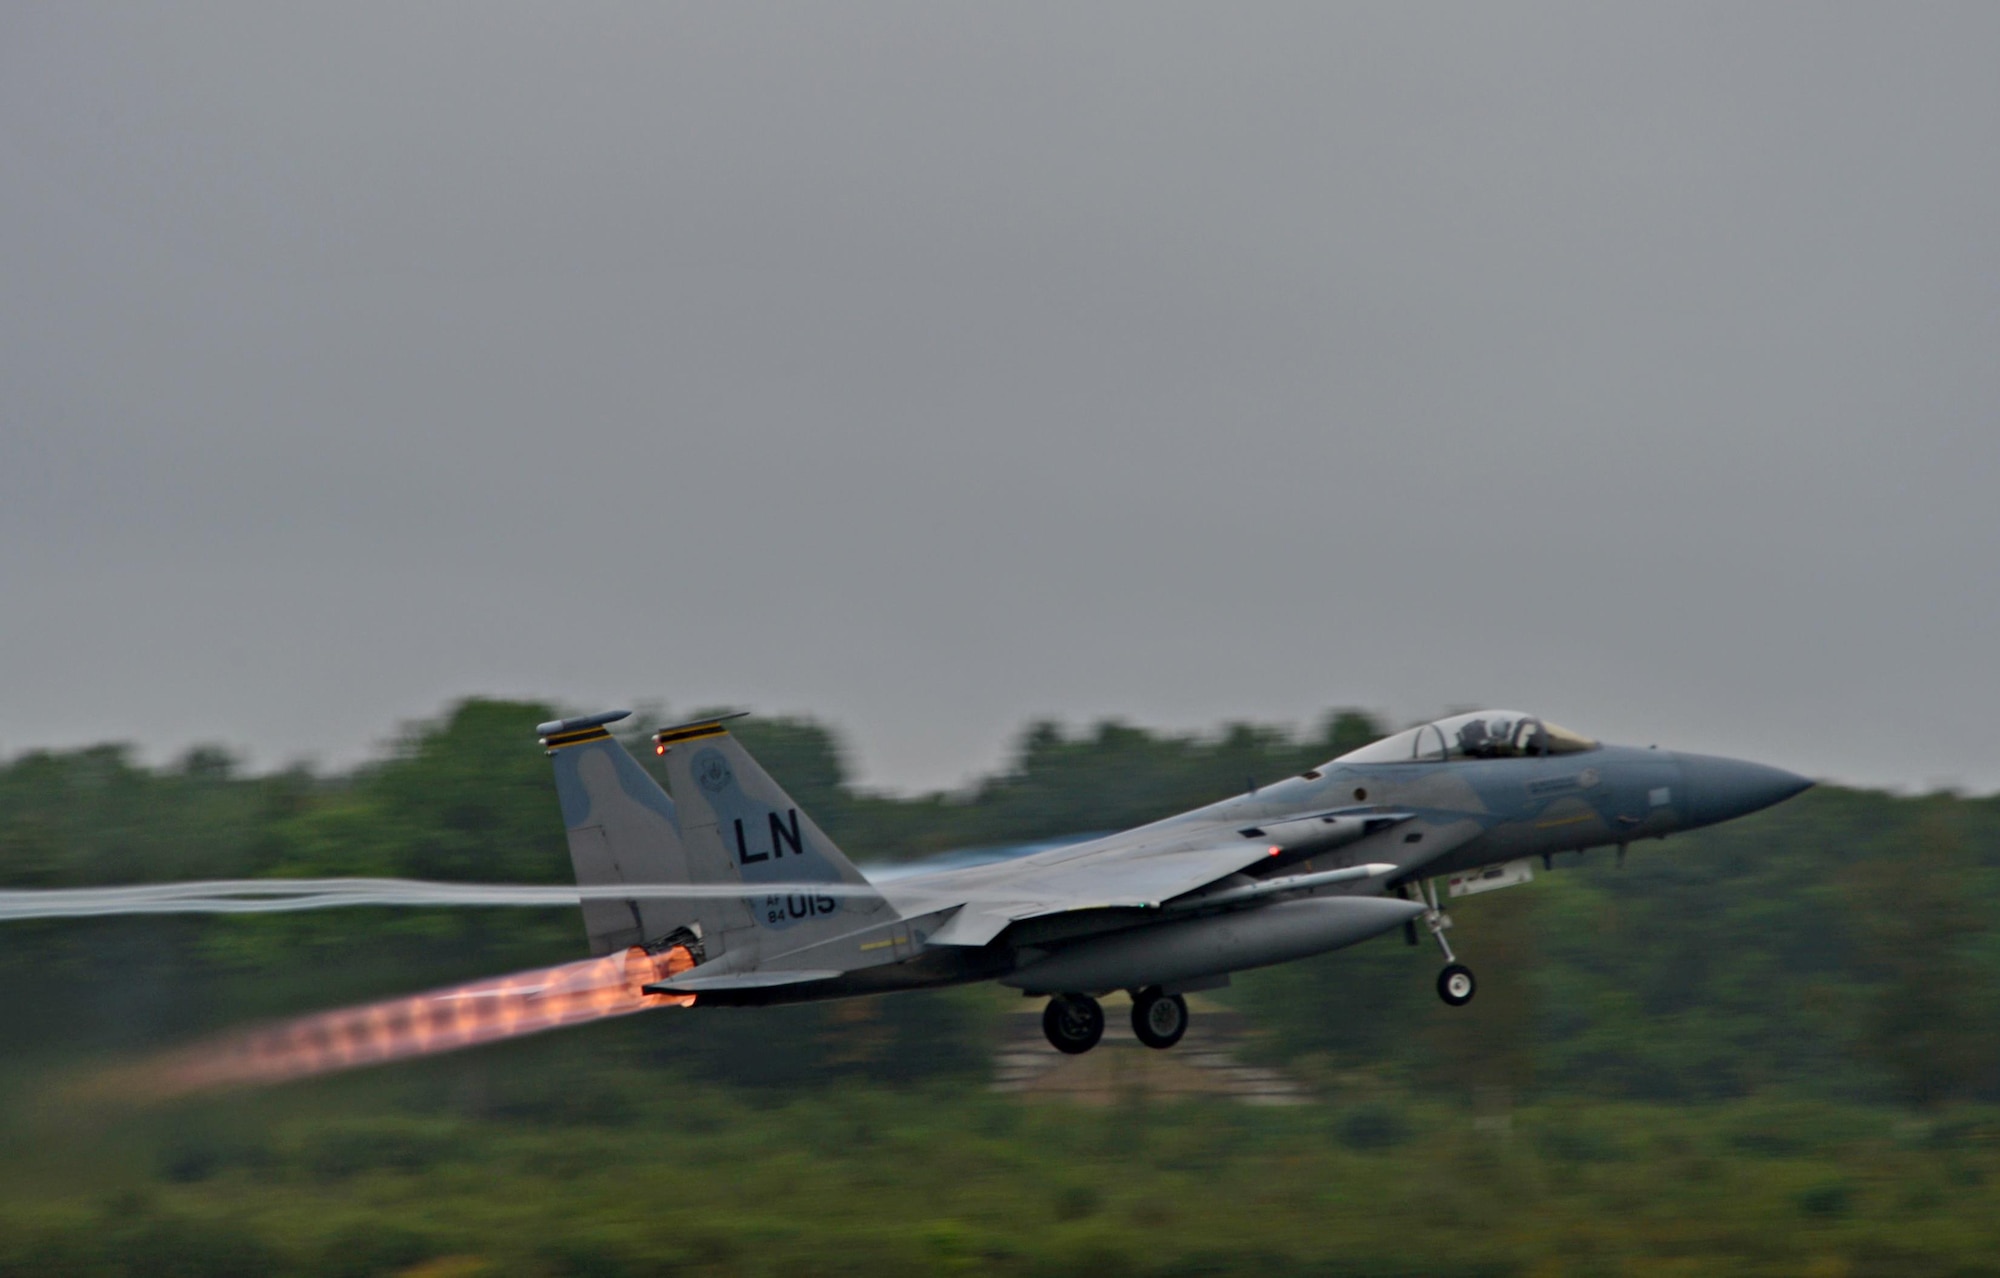 A 493rd Fighter Squadron F-15C Eagle takes off from Ämari Air Base, Estonia, Aug. 30, 2016. The squadron flew alongside the 194th Expeditionary Fighter Squadron assigned to the California Air National Guard in Fresno while participating in a flying training deployment with several allied nations and partners. The 493rd is assigned to Royal Air Force Lakenheath, England. (U.S. Air Force photo by Senior Airman Erin Trower/Released)